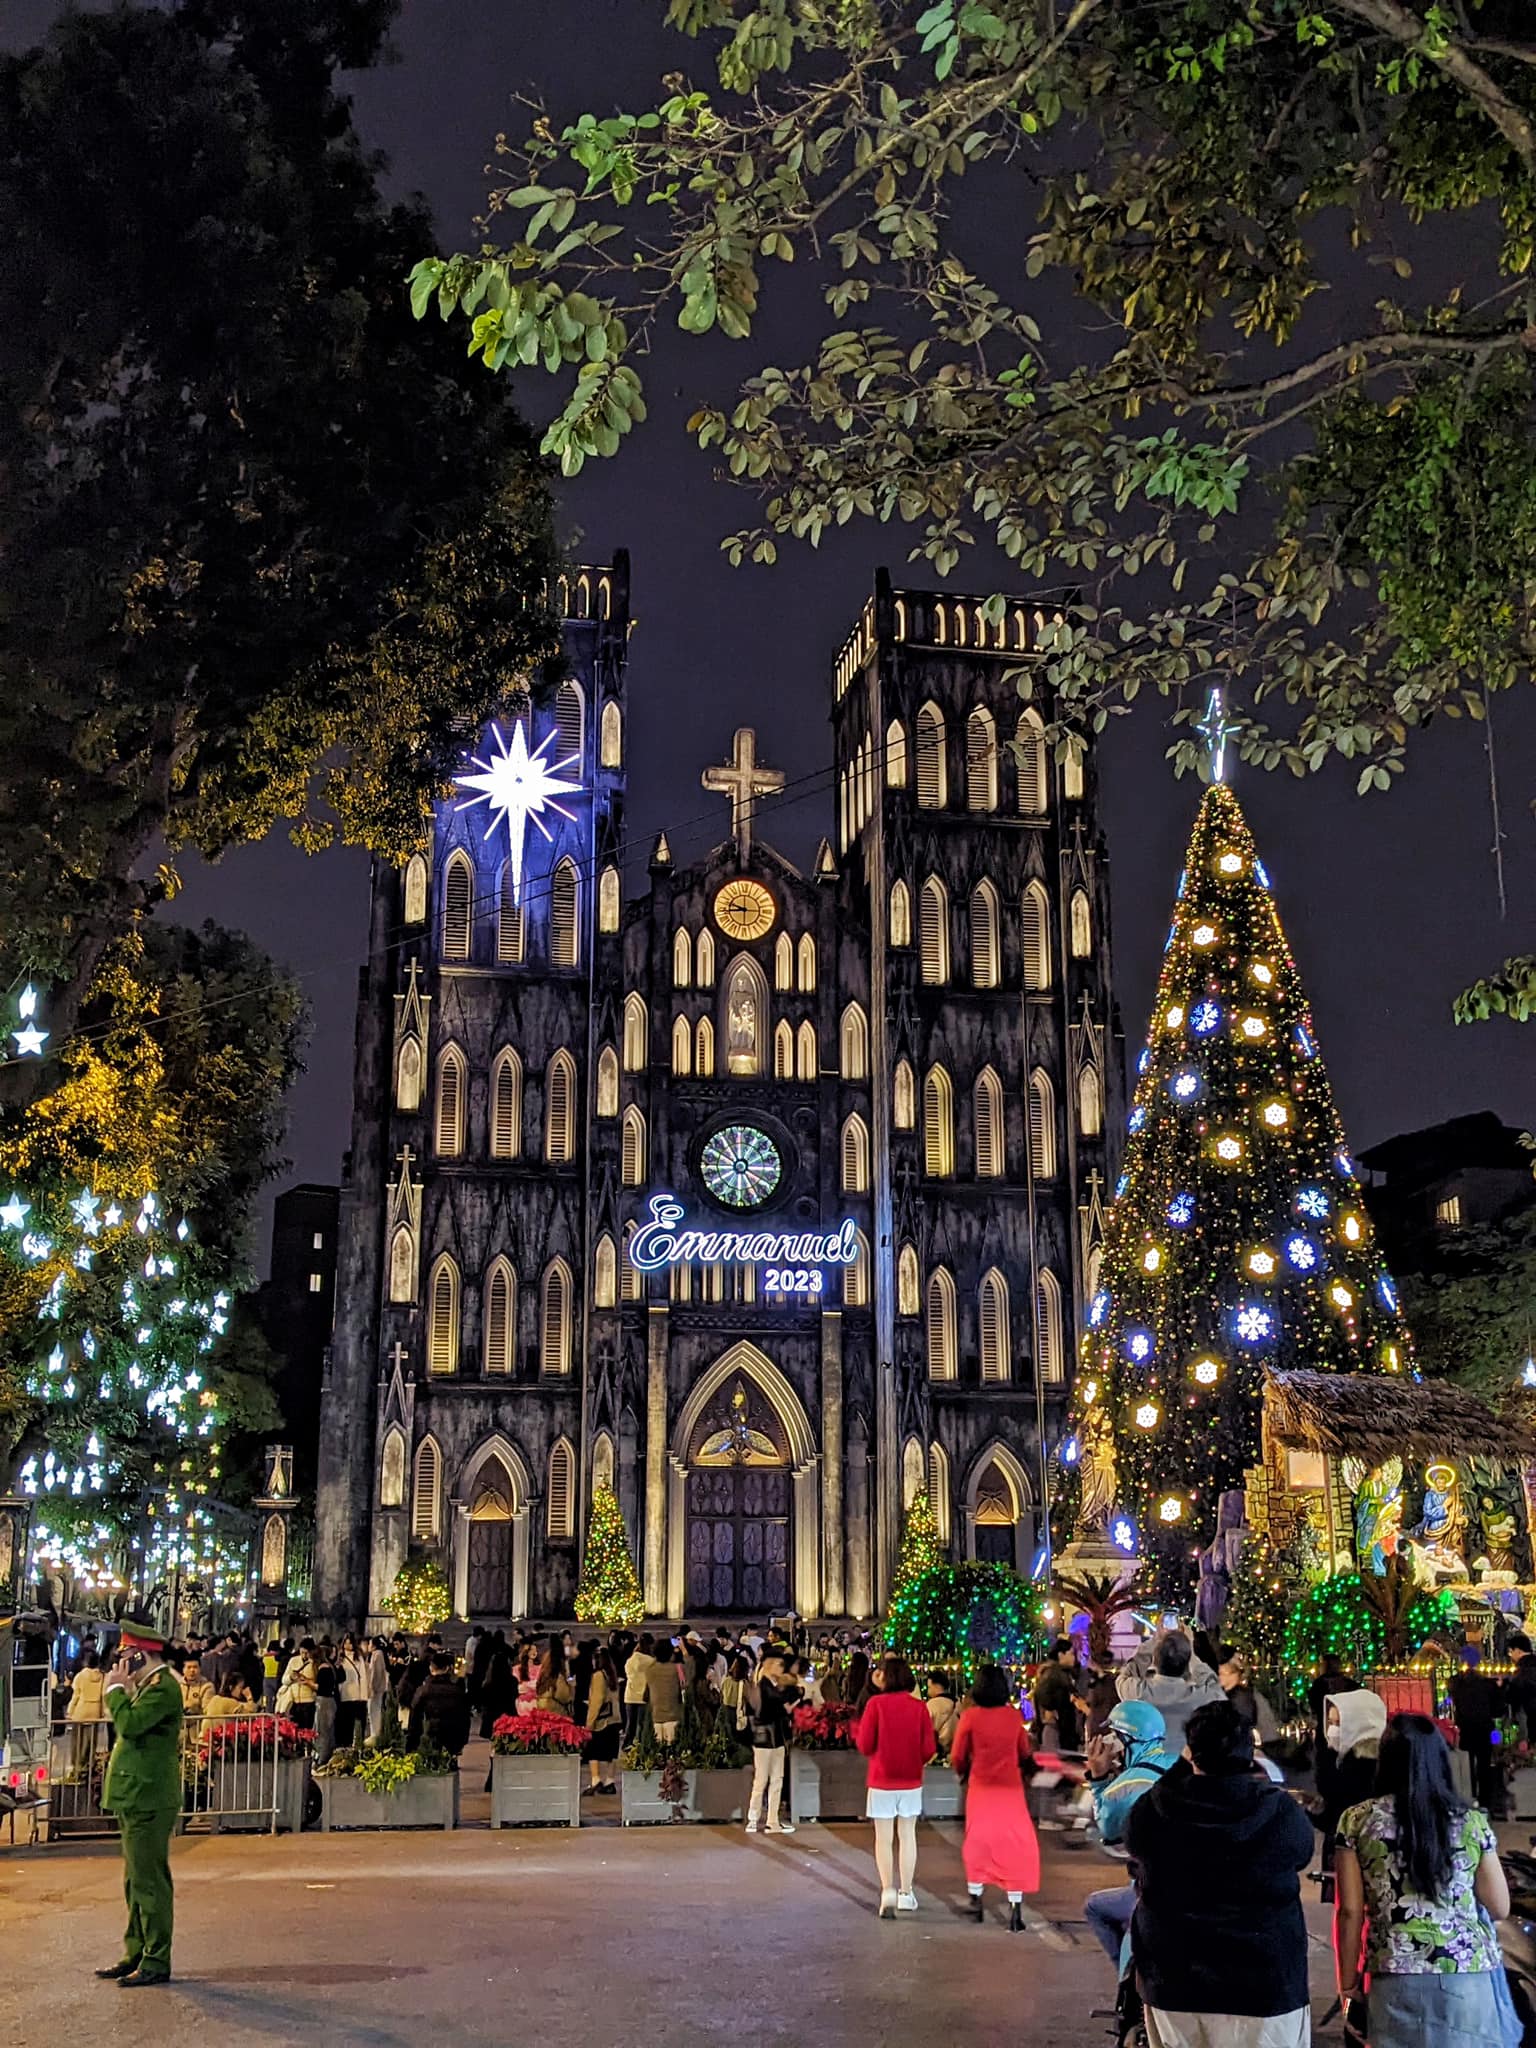 At the Cathedral - a place that attracts a large number of people and tourists to celebrate Christmas early on the weekend despite the cold weather.